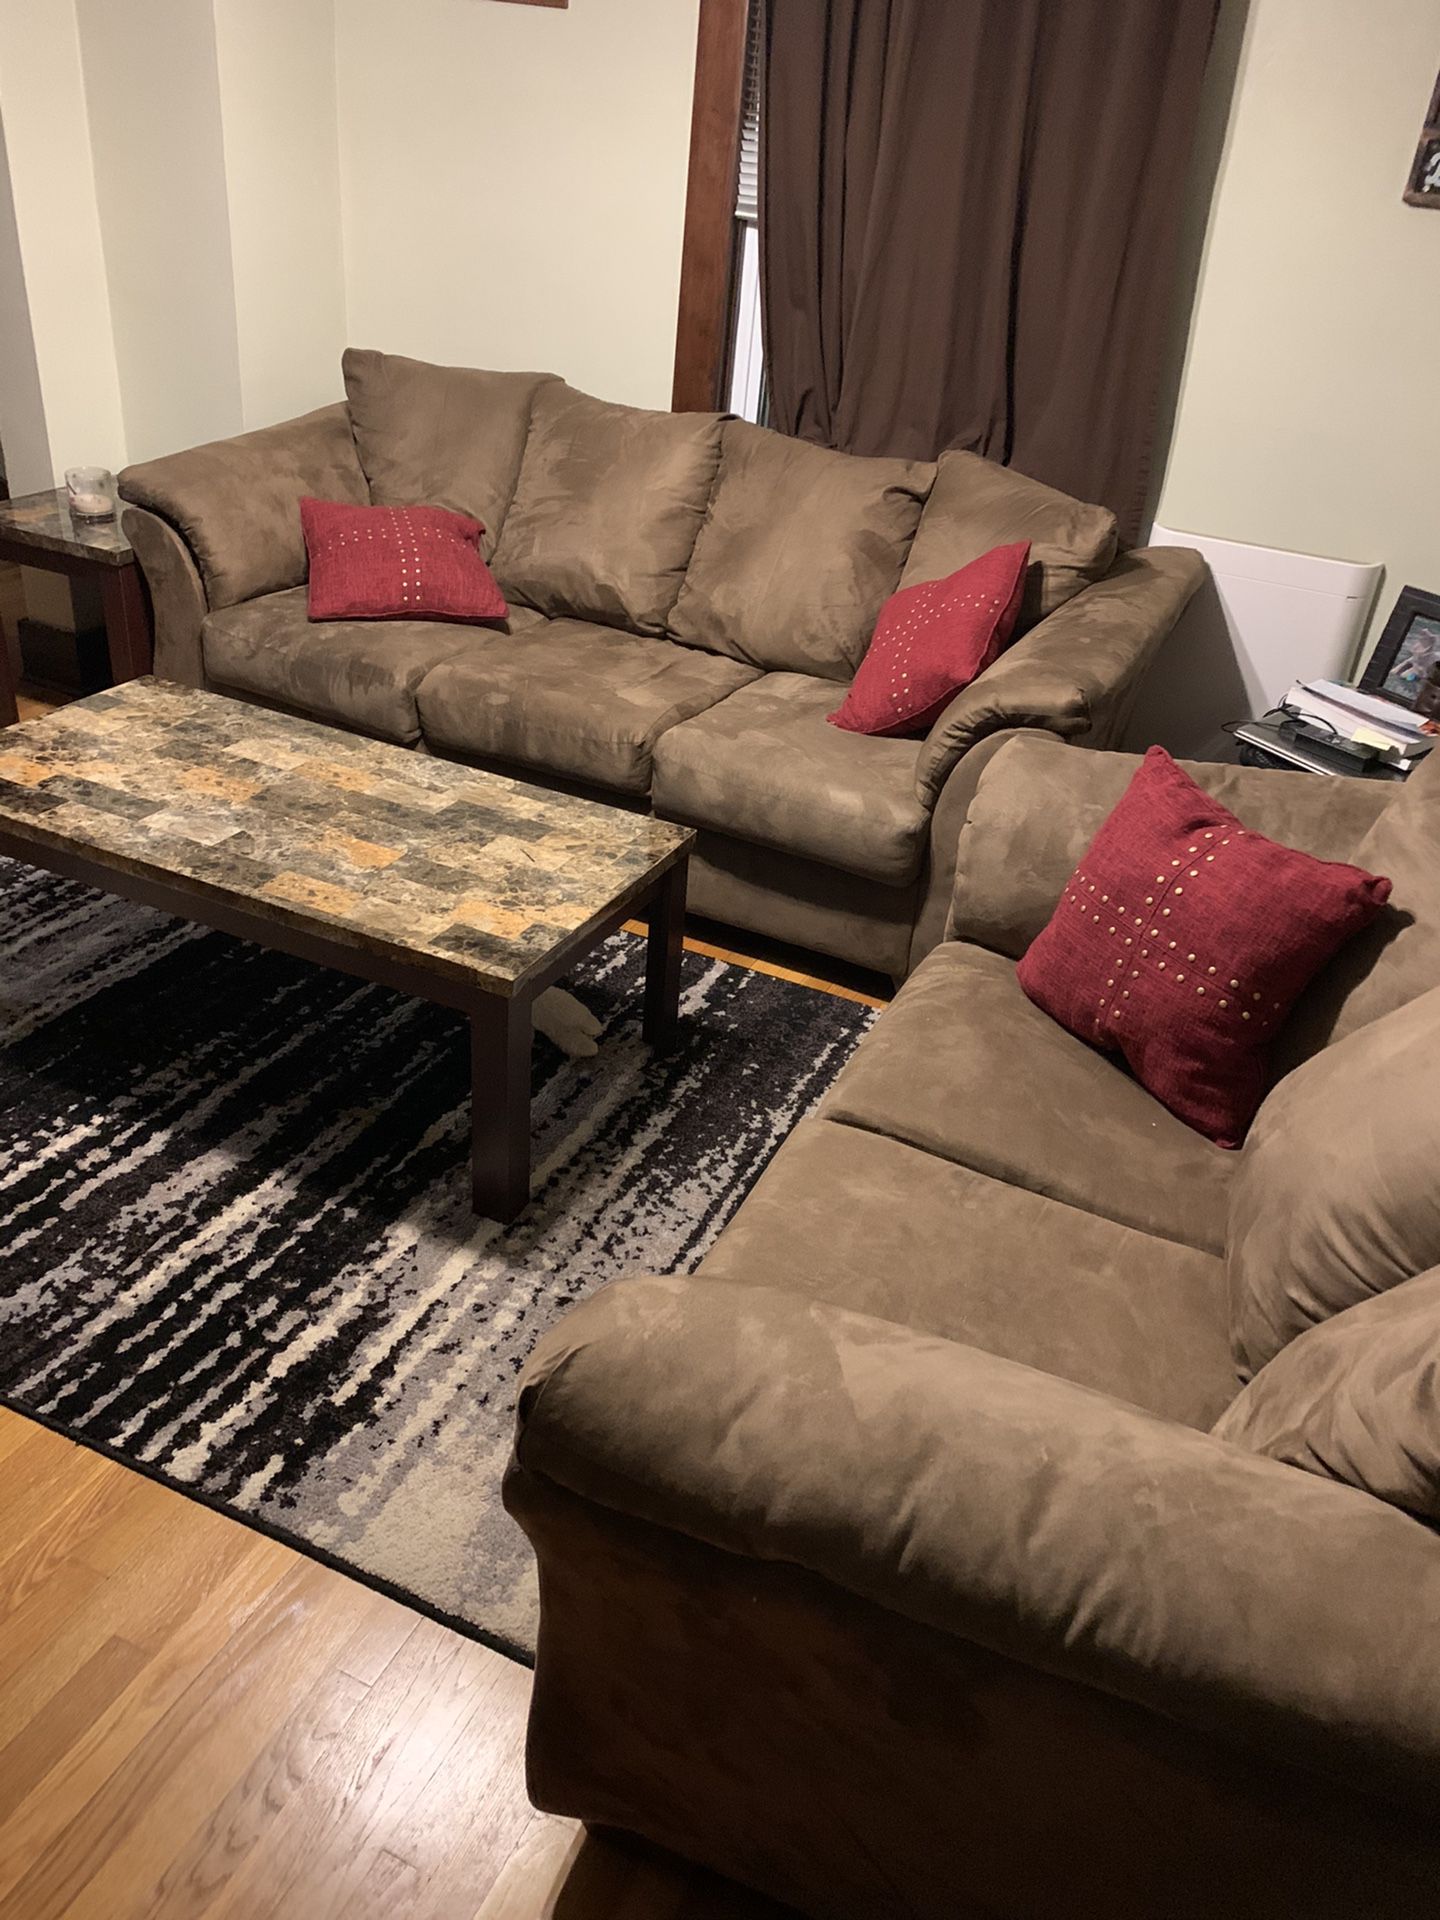 Couches and End Tables